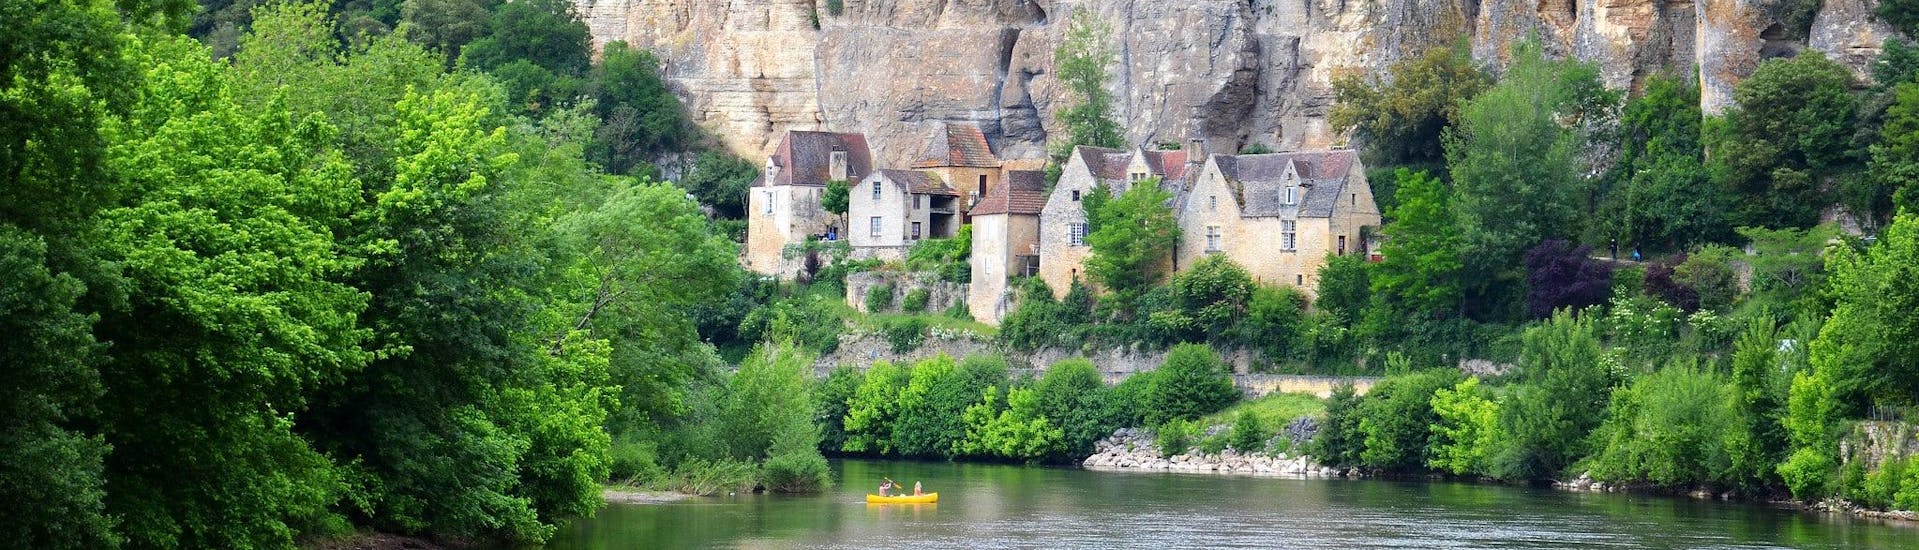 Canoe enthusiasts are paddling quietly on the Vézère river in the Dordogne in front of the troglodytic habitats of the town of Les Eyzies.